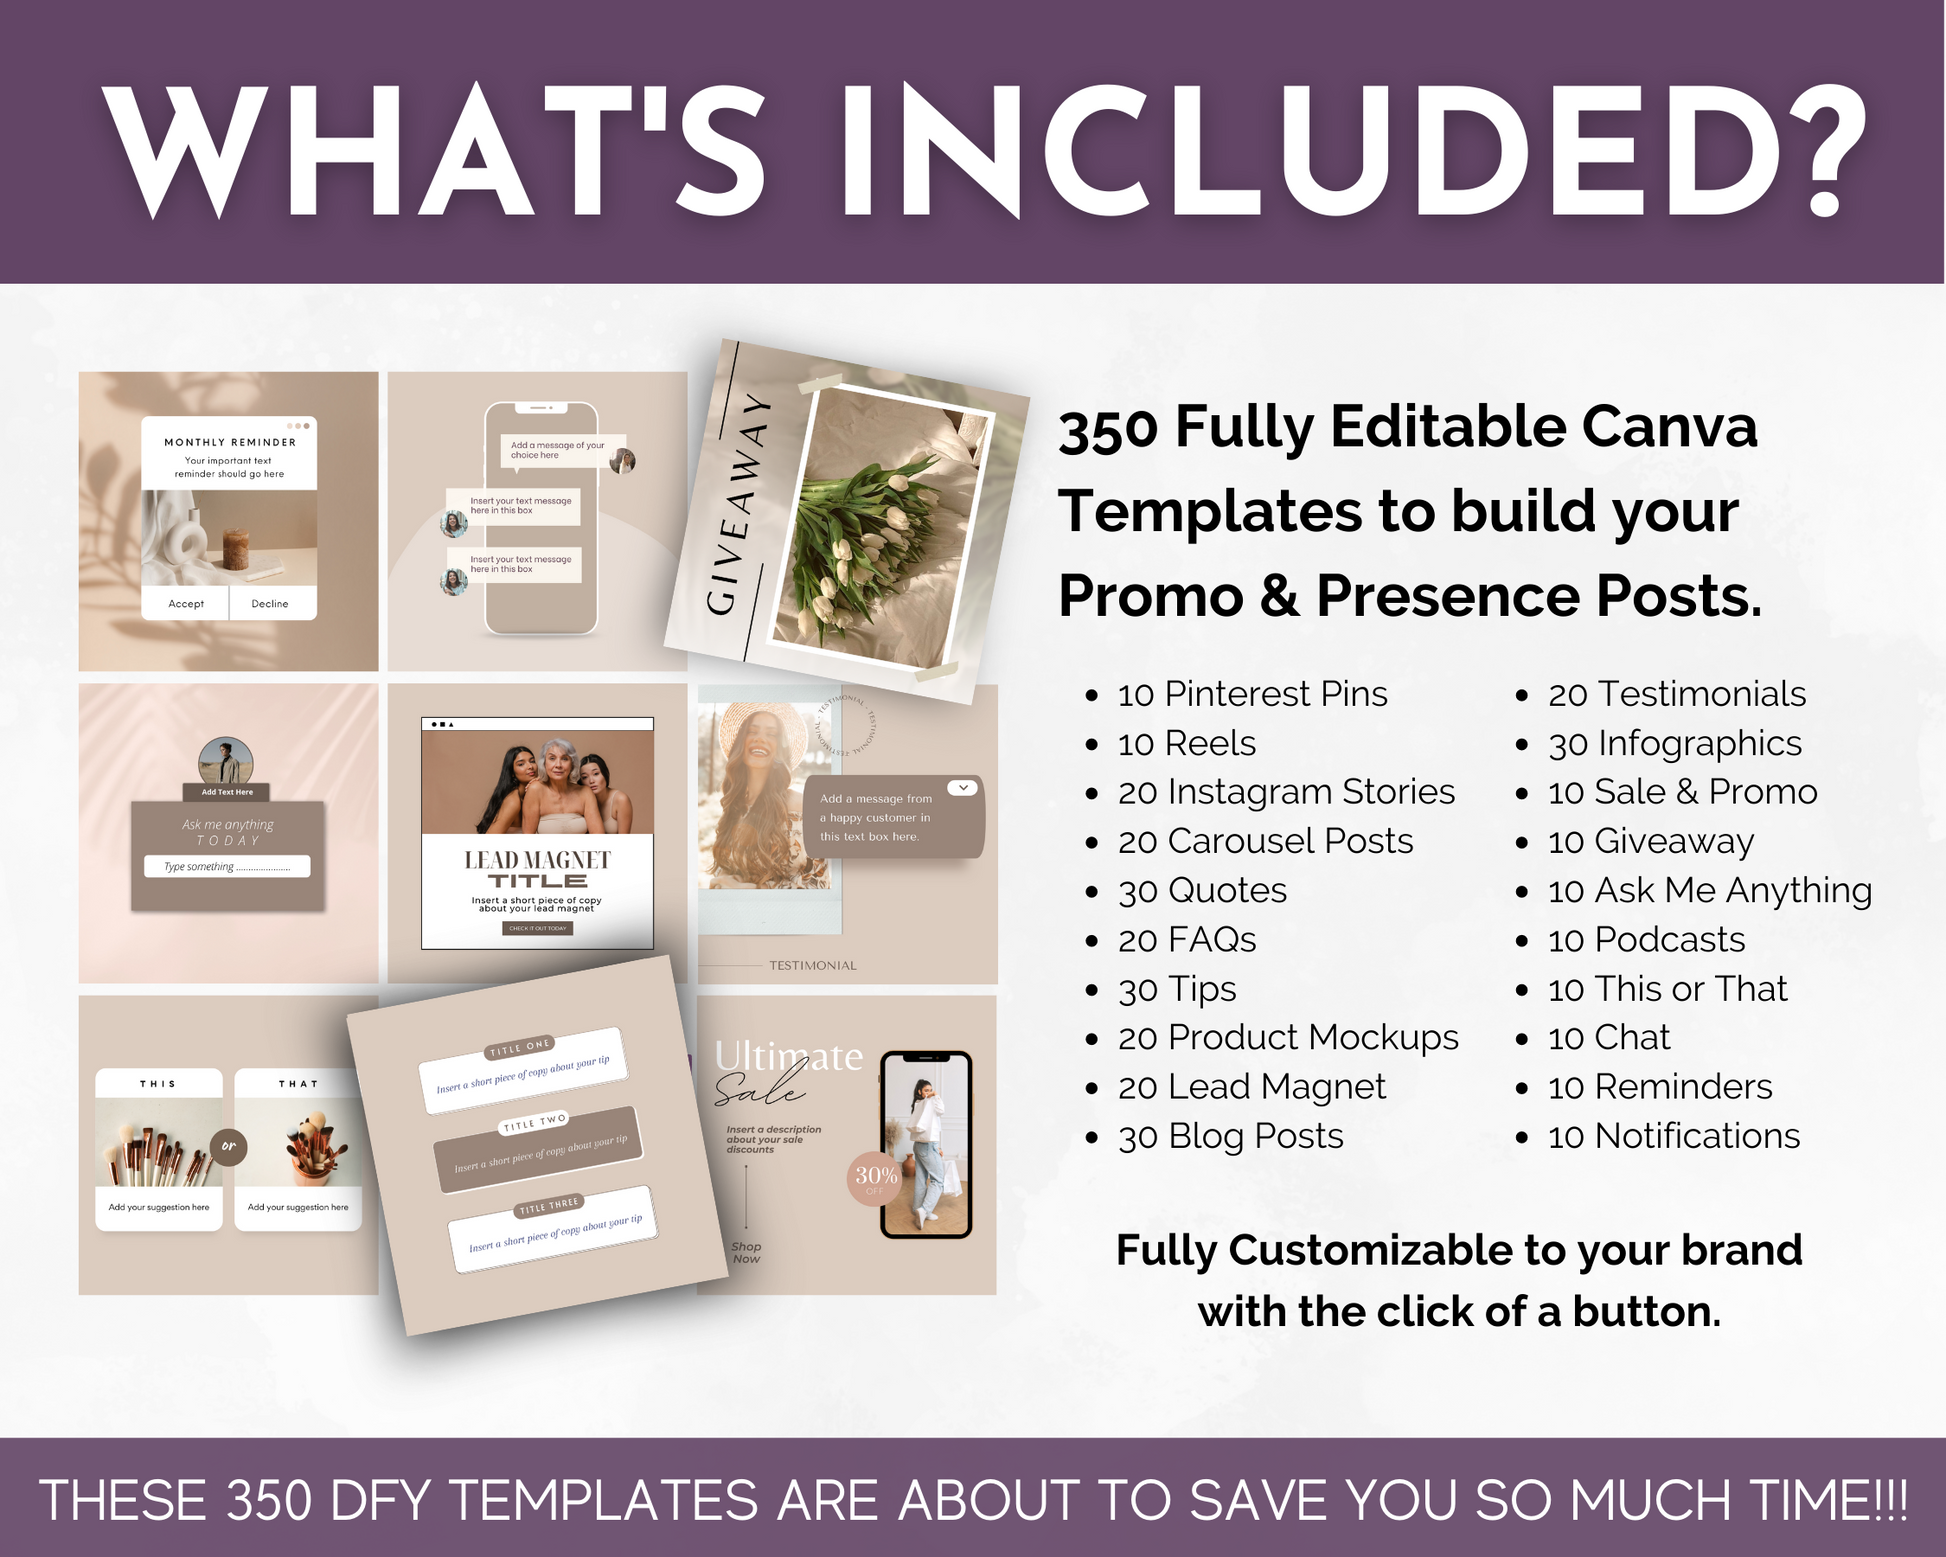 This bundle includes content and social media images for effective promo and online presence with the Promo & Presence Social Media Post Bundle with Canva Templates from Socially Inclined.